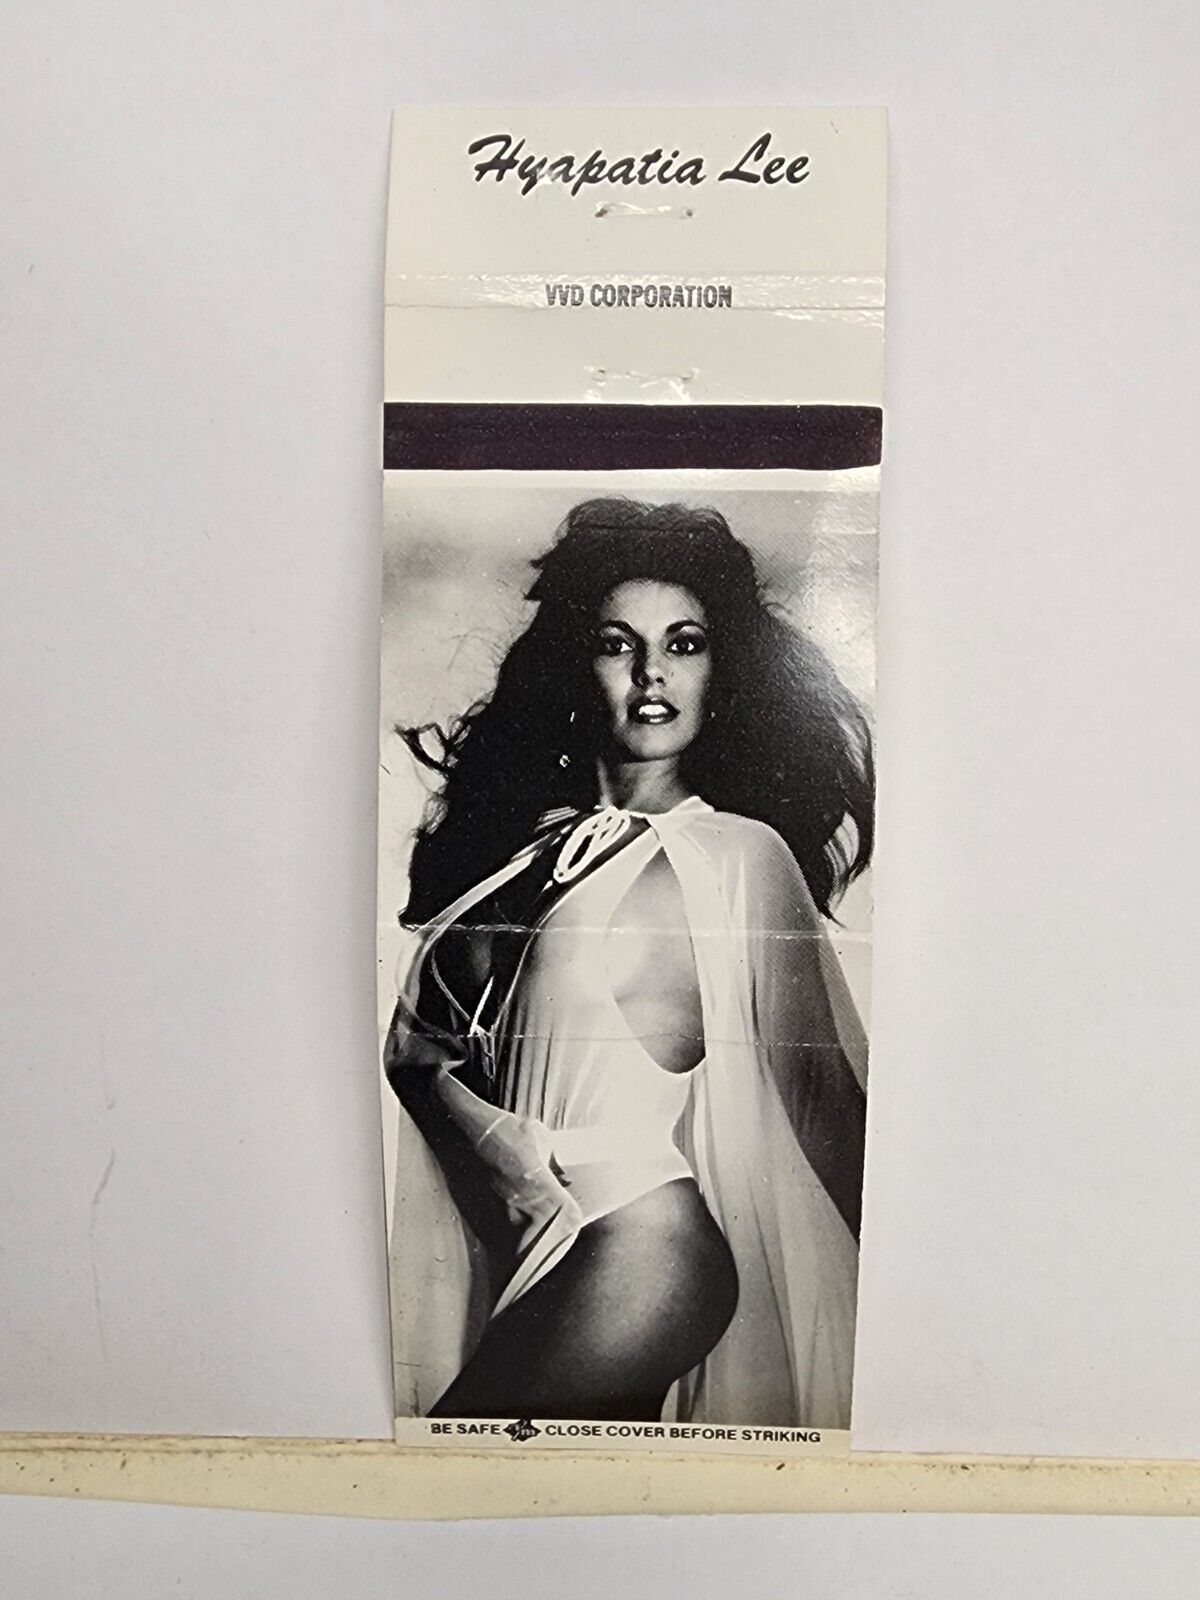 Vintage Matchbook Cover - HYAPATIA LEE 900 Porn Star Adult Video Actress